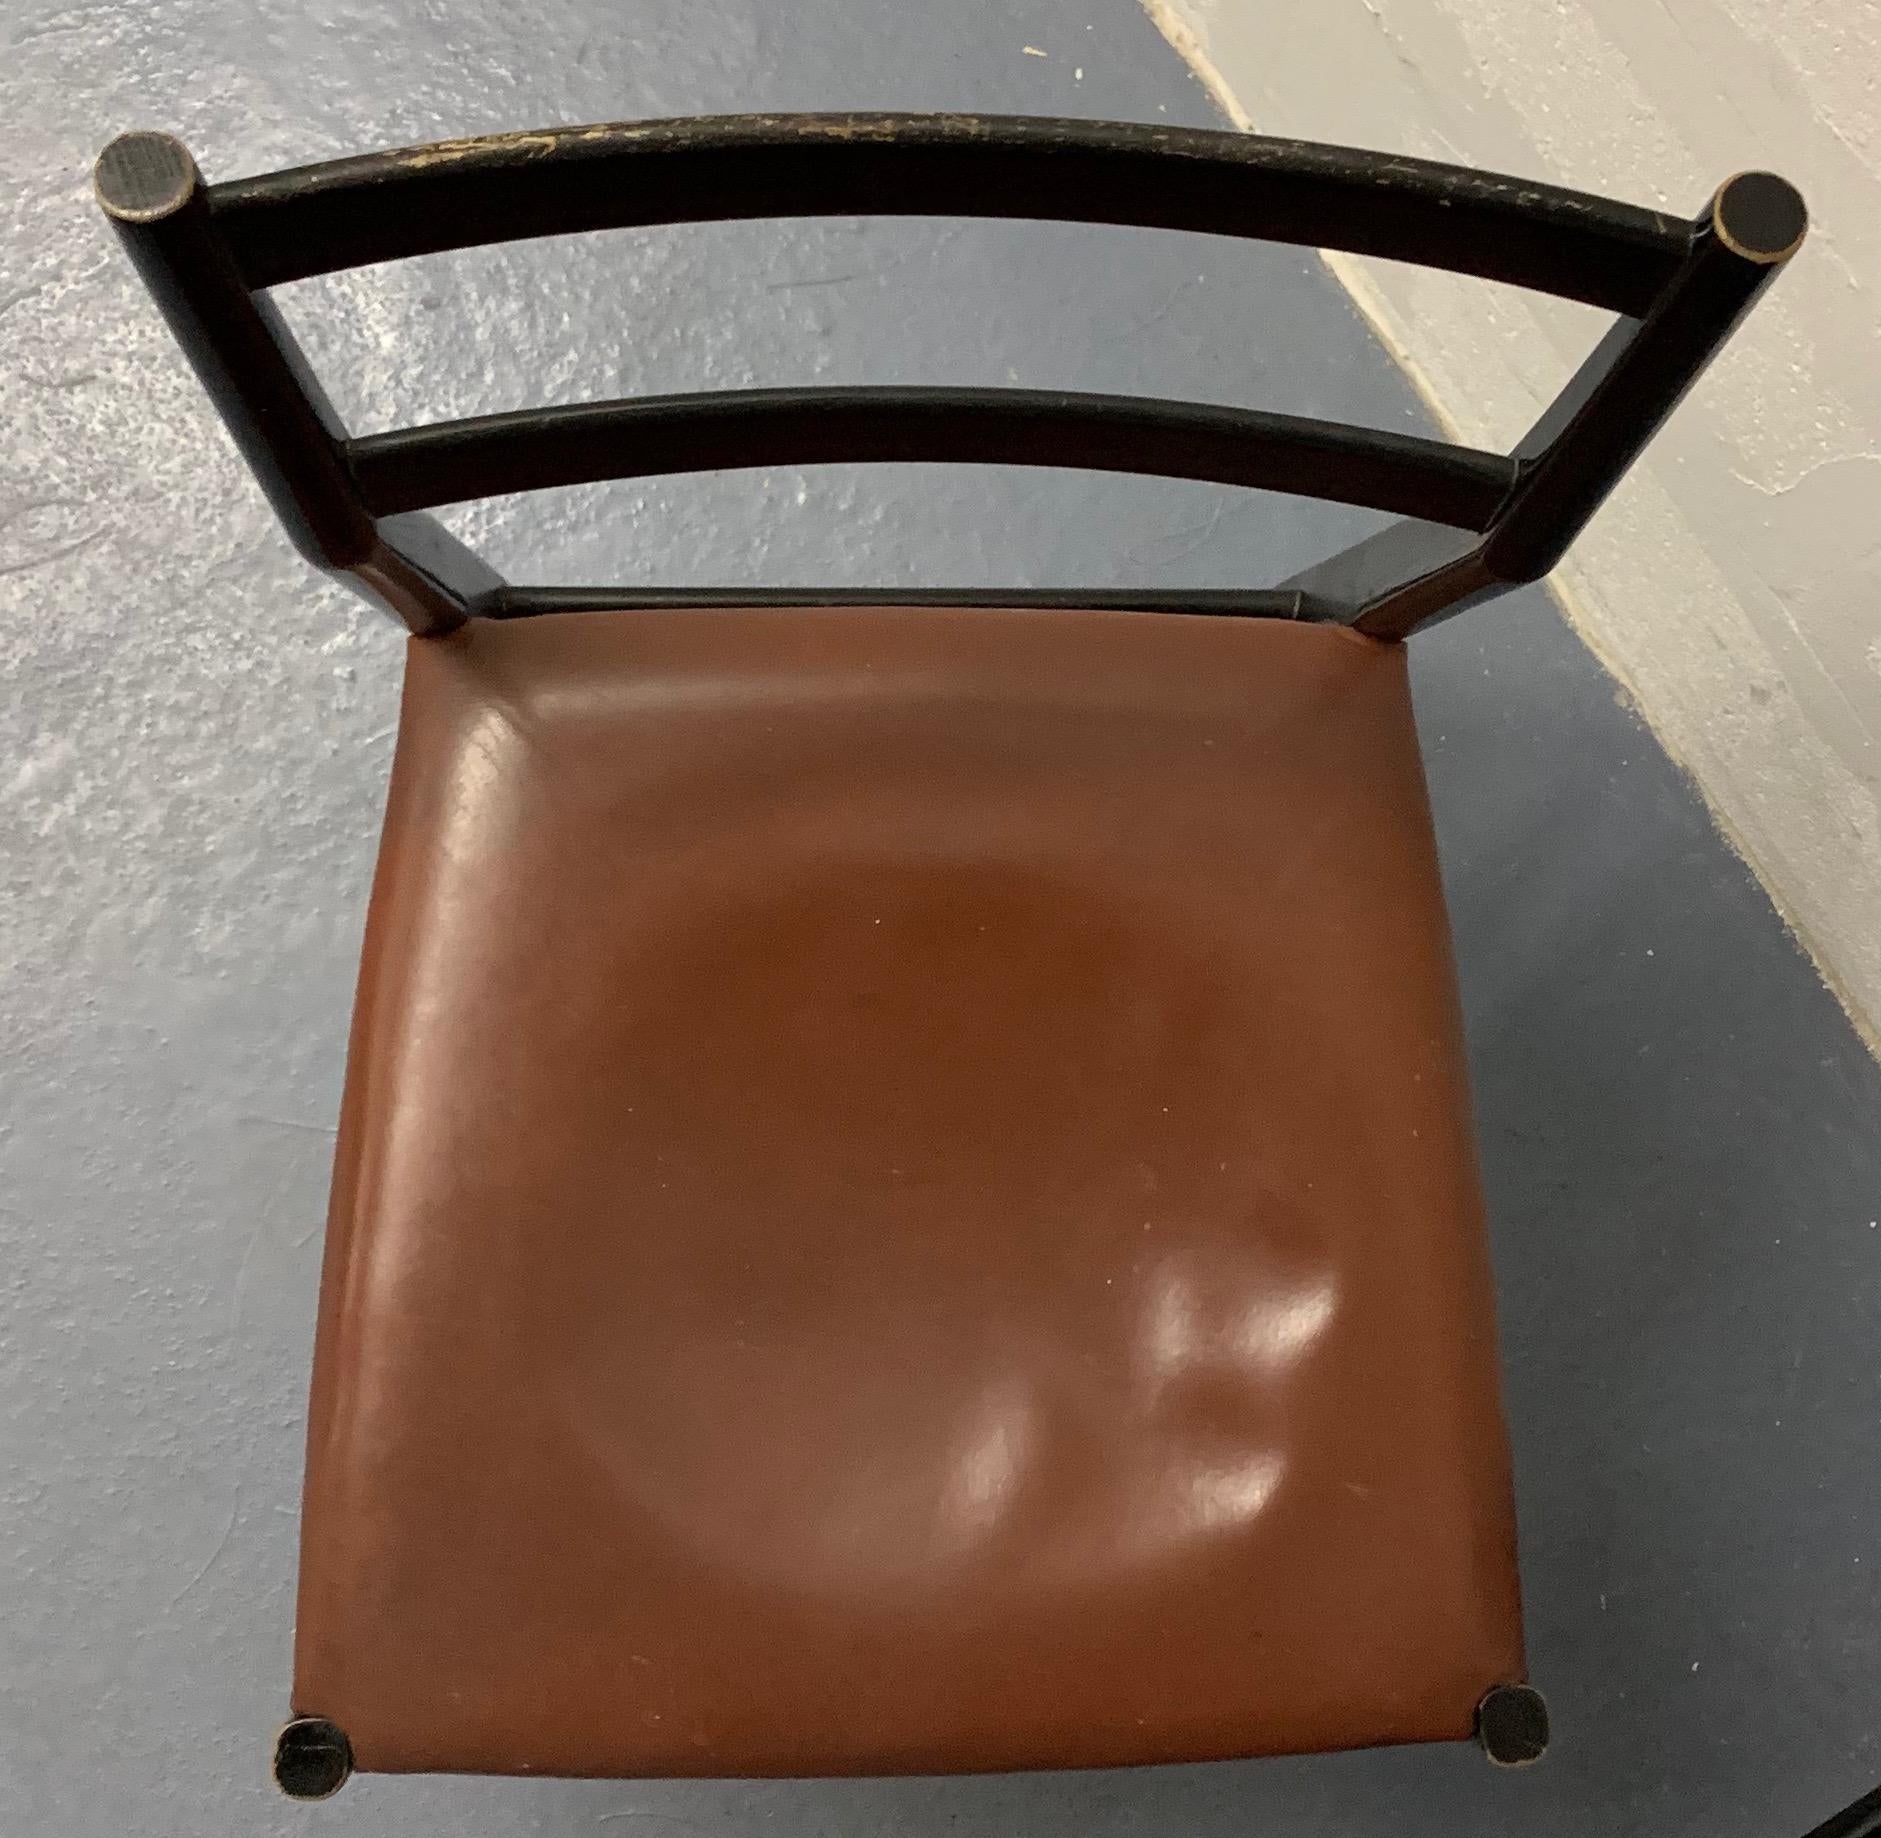 Set of 4 Gio Ponti leggera chairs in untouched original condition. Black lacquered wood bases and brown leather seats. Signes of 60 years of regular use. Fabric on the underside of the seat is defect .